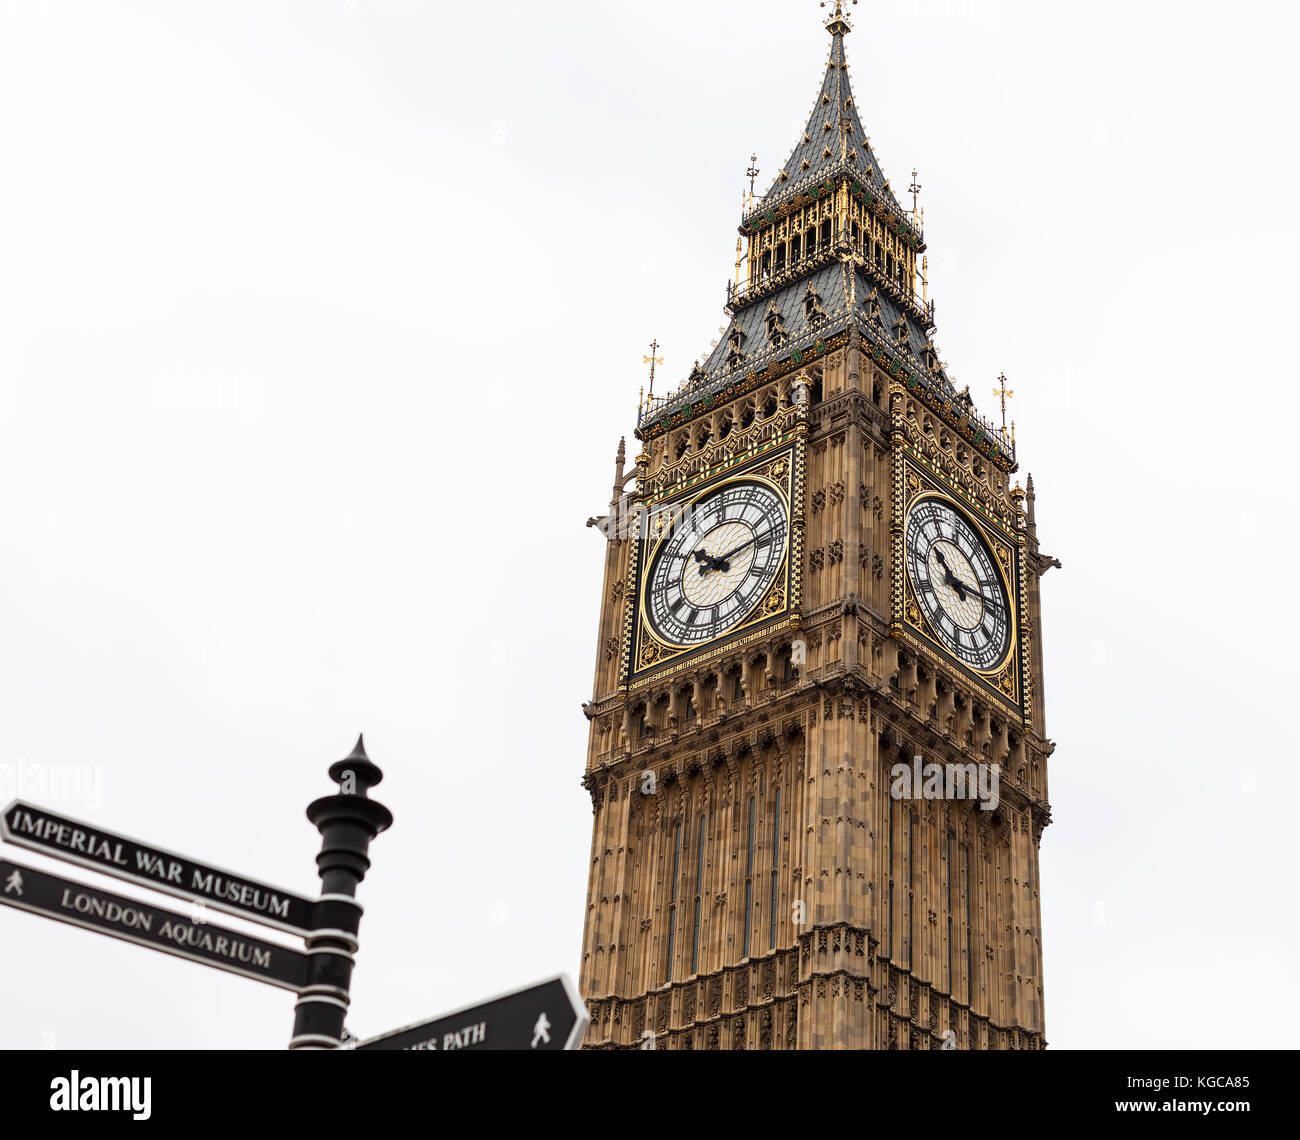 Big Ben clock tower, iconic gothic landmark in central London, England Stock Photo